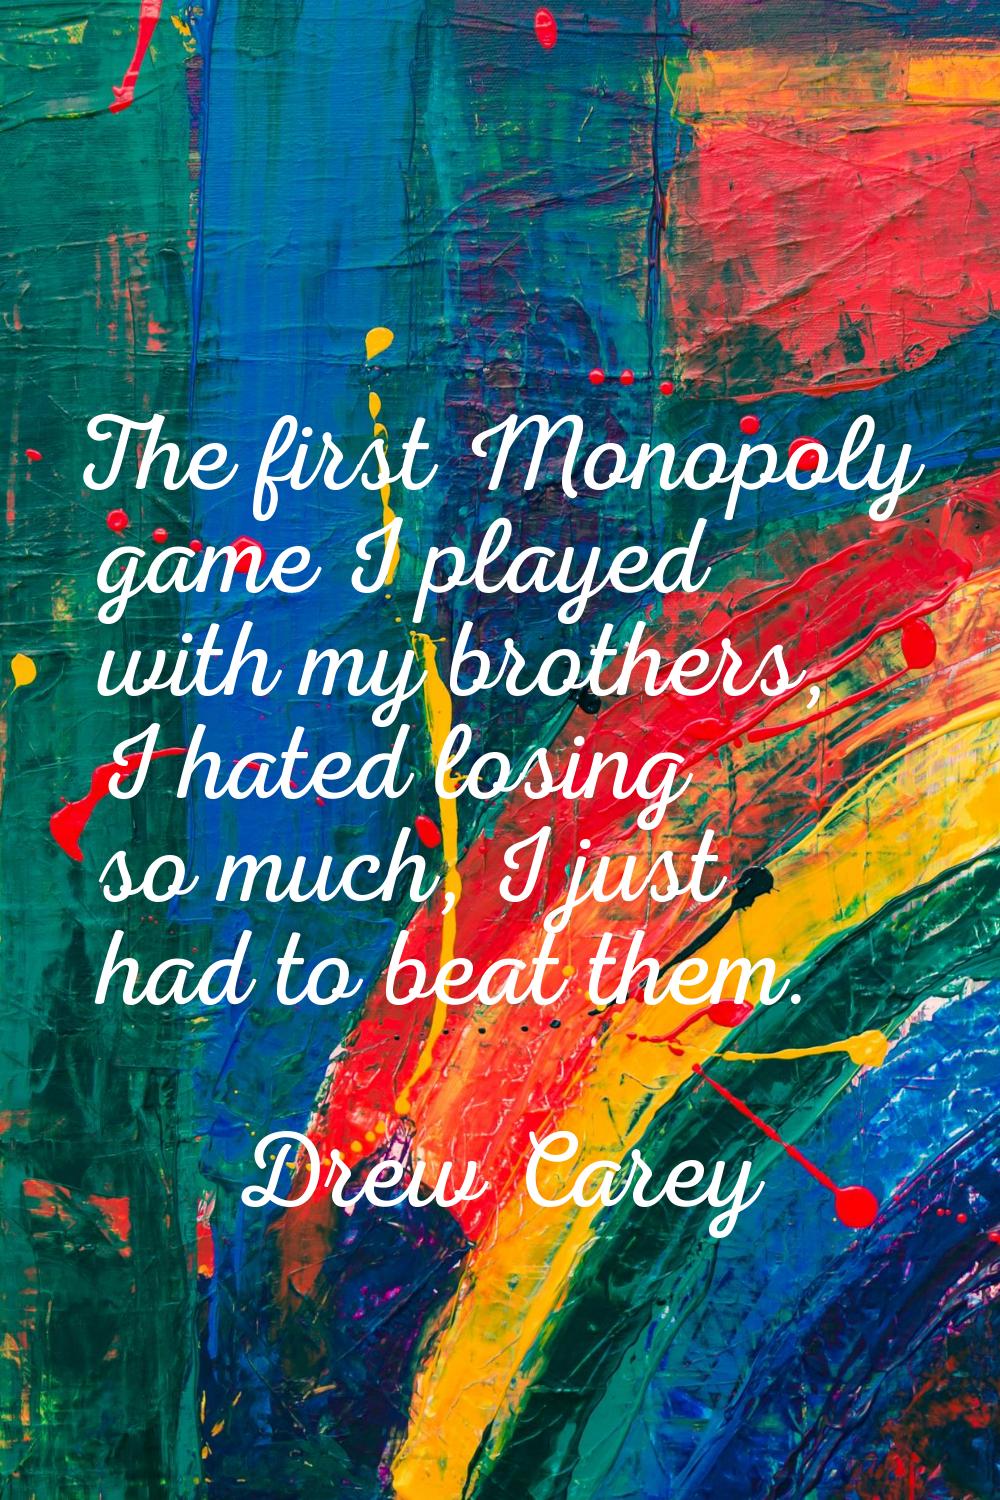 The first Monopoly game I played with my brothers, I hated losing so much, I just had to beat them.